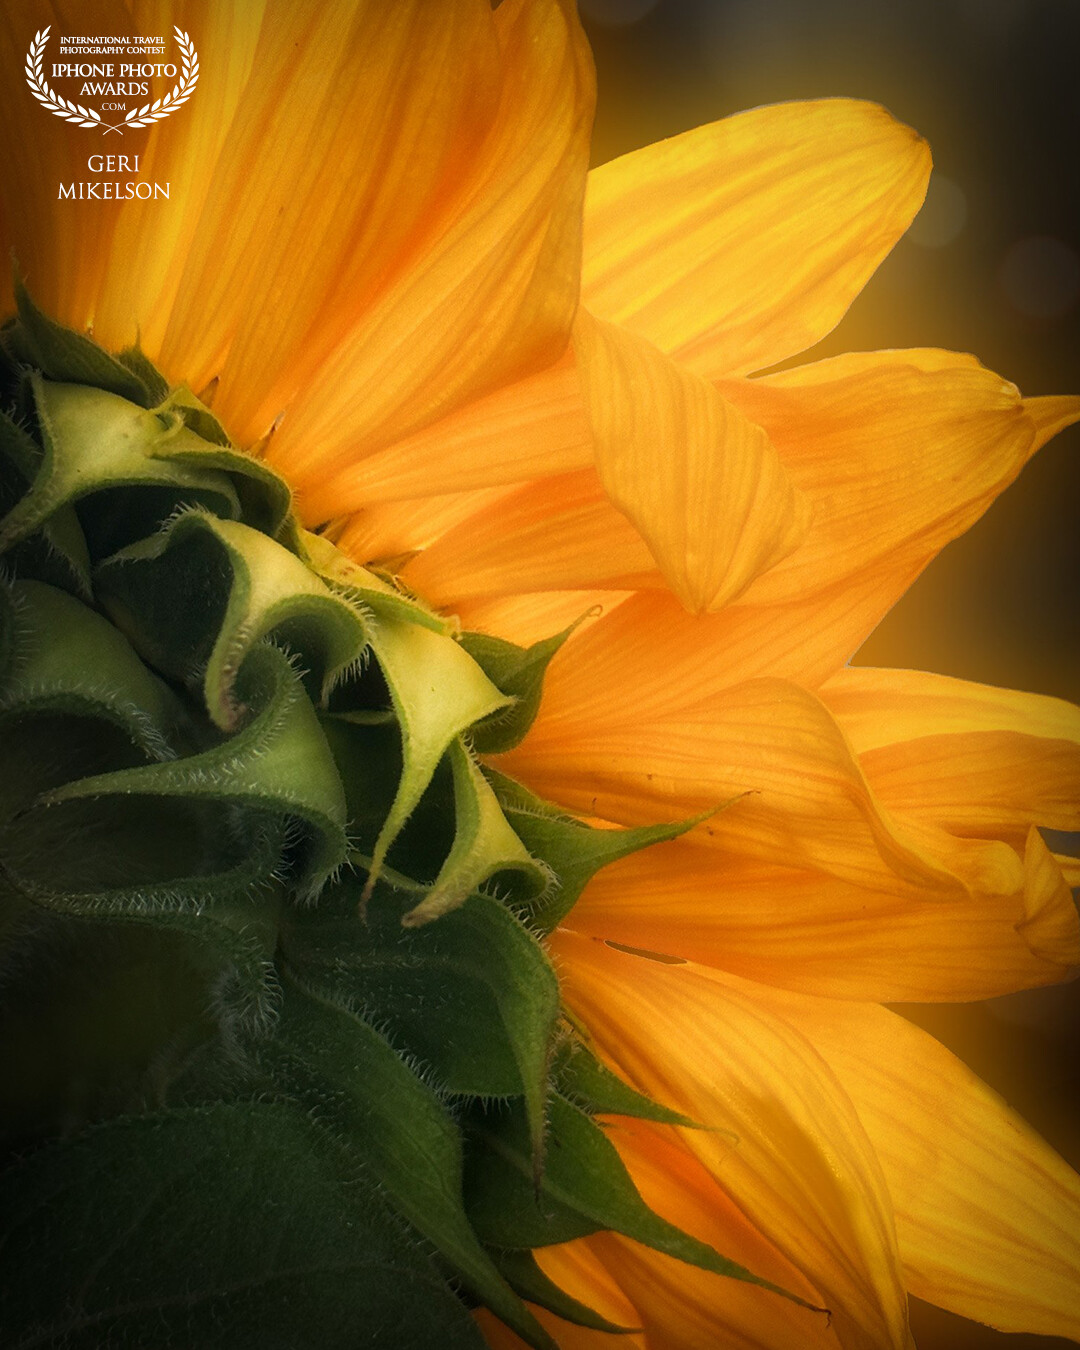 I liked the way the light fell on this sunflower and wanted to showcase it's details.